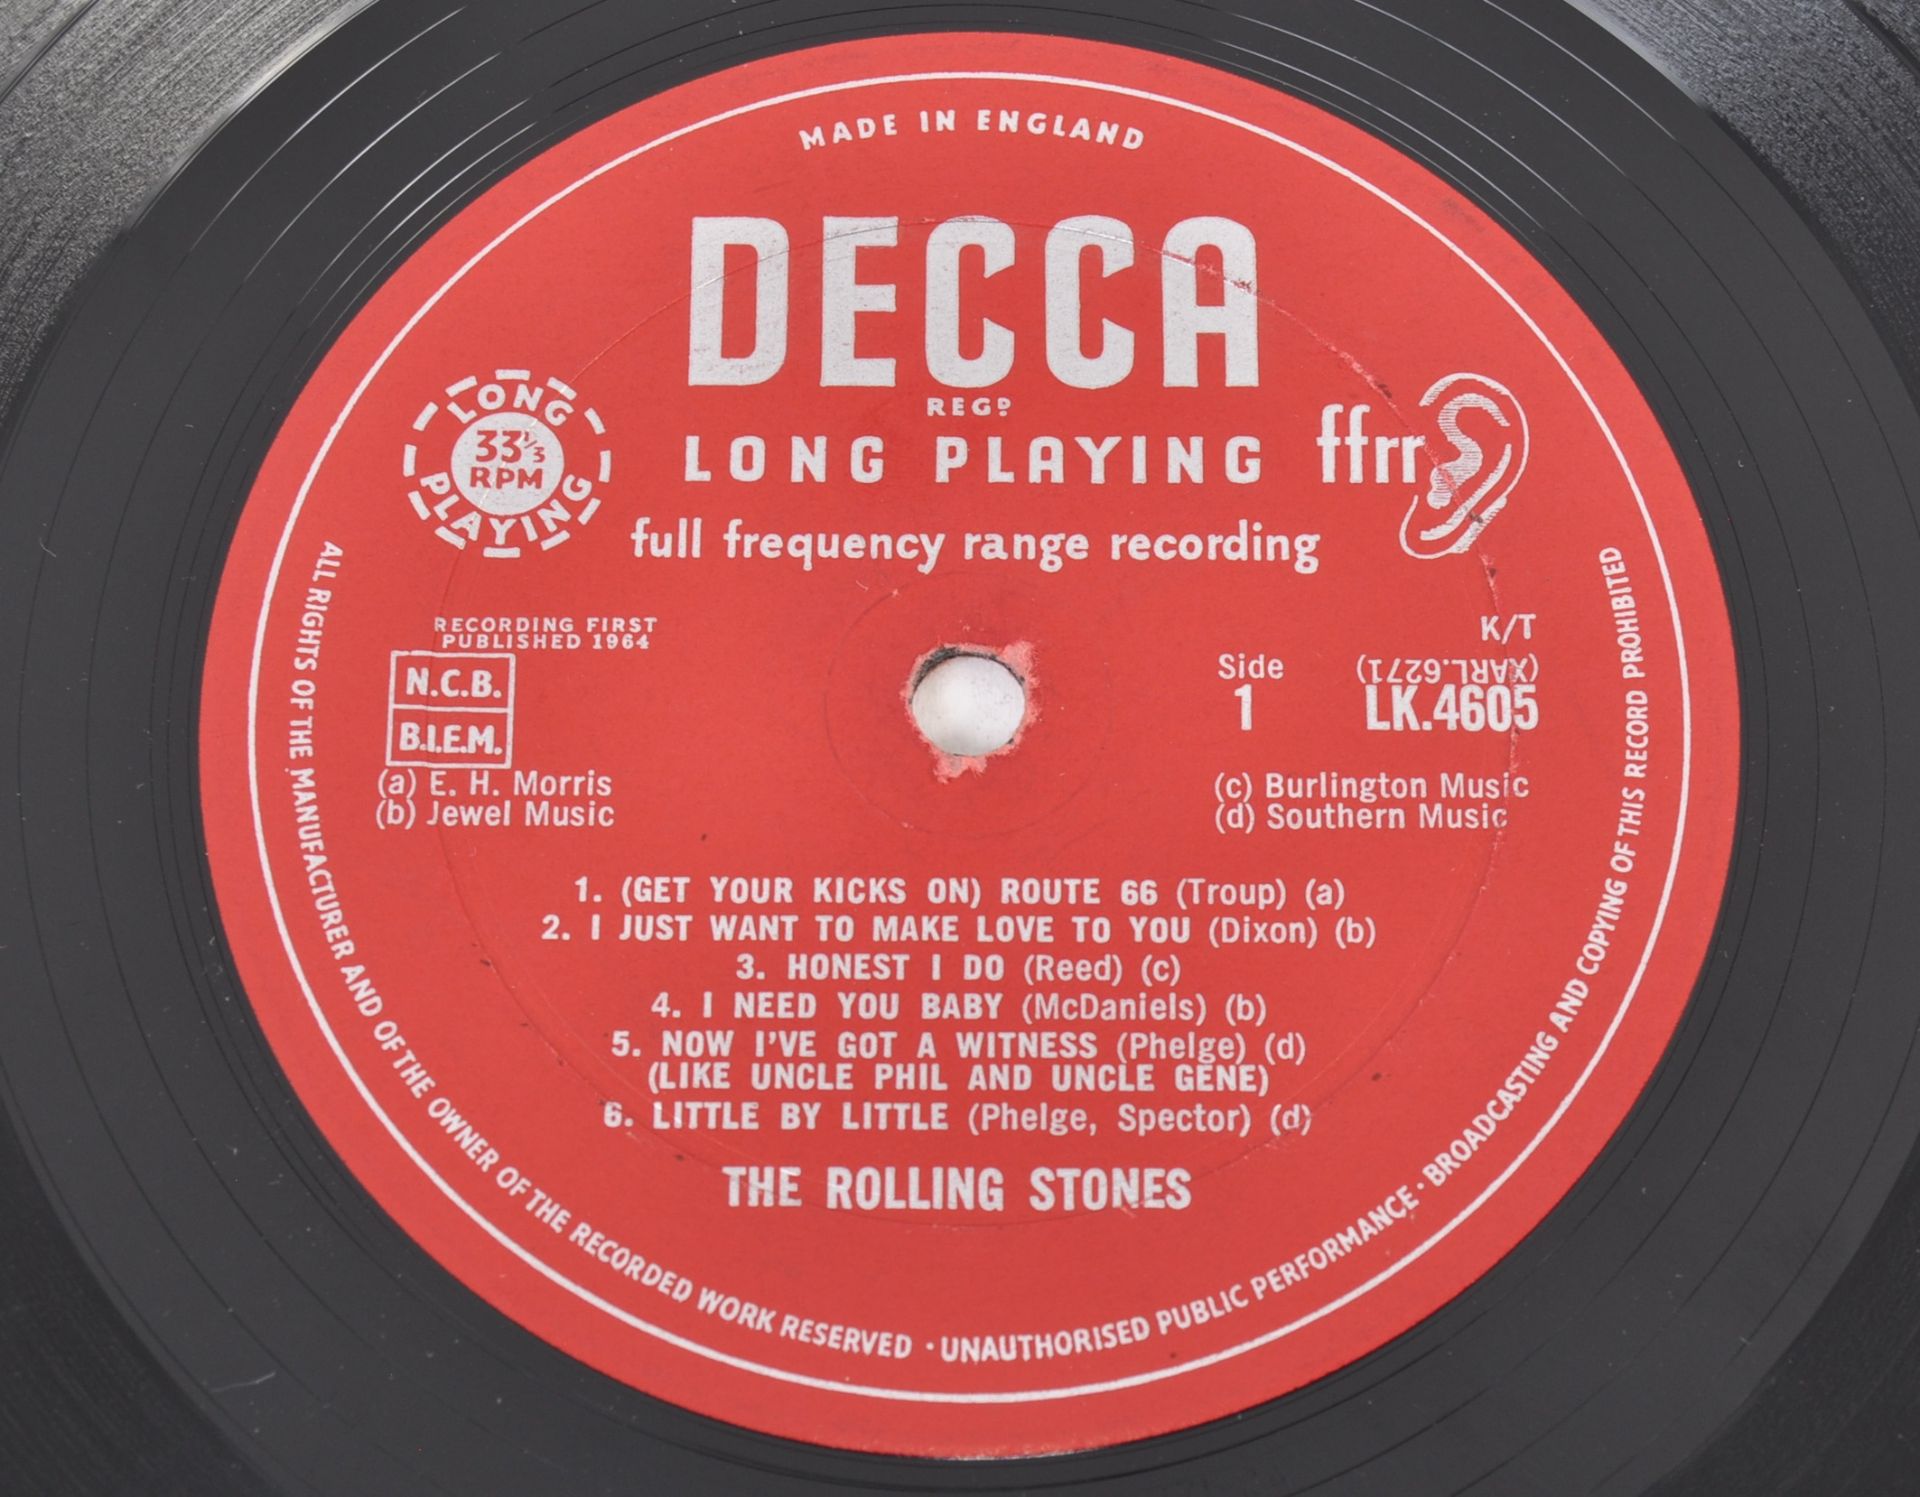 THE ROLLING STONES FIRST ALBUM - 1964 DECCA RELEASE - Image 3 of 4